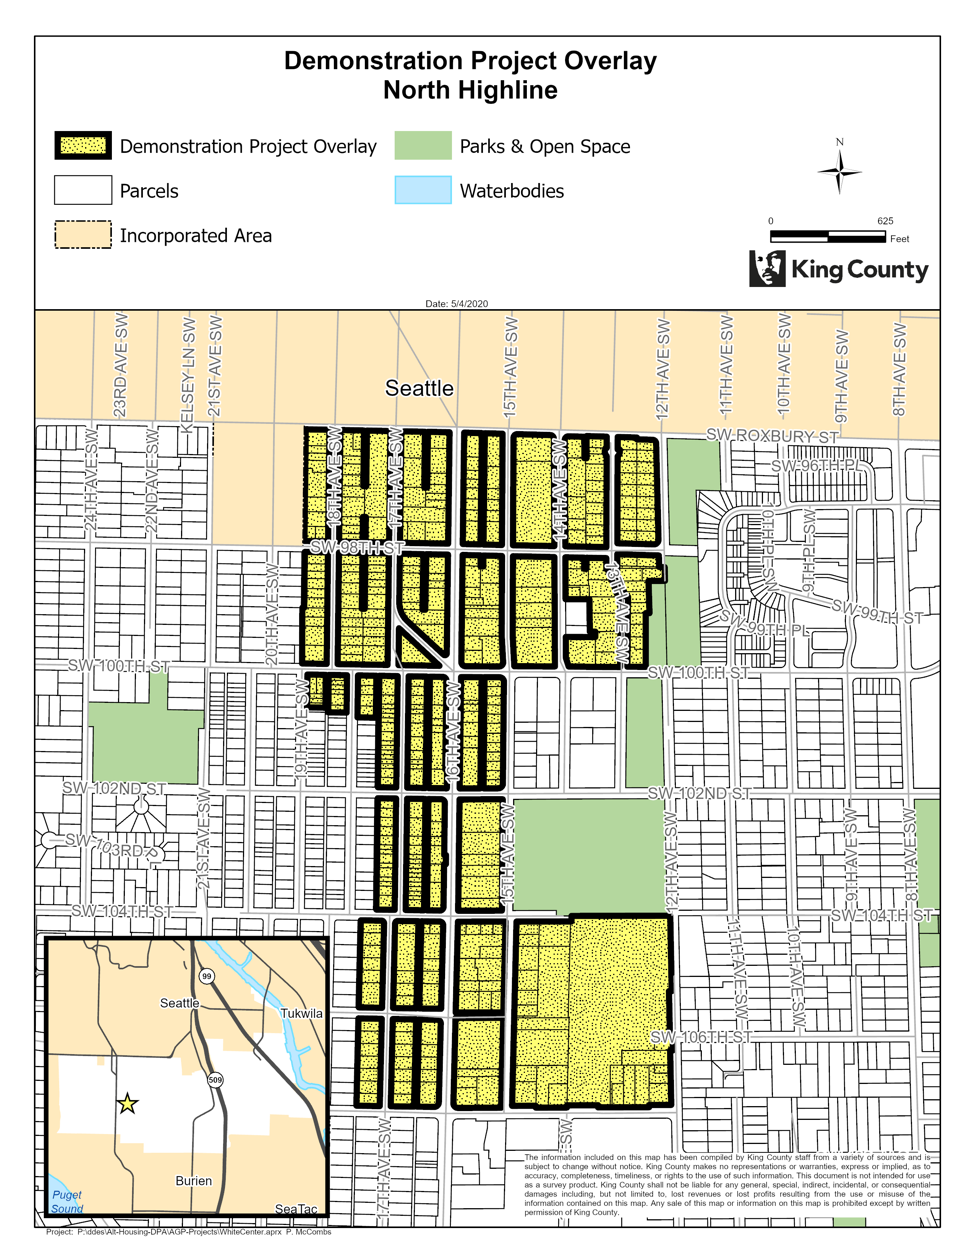 The zoning overlay in White Center where a demonstration project could be realized. (King County)